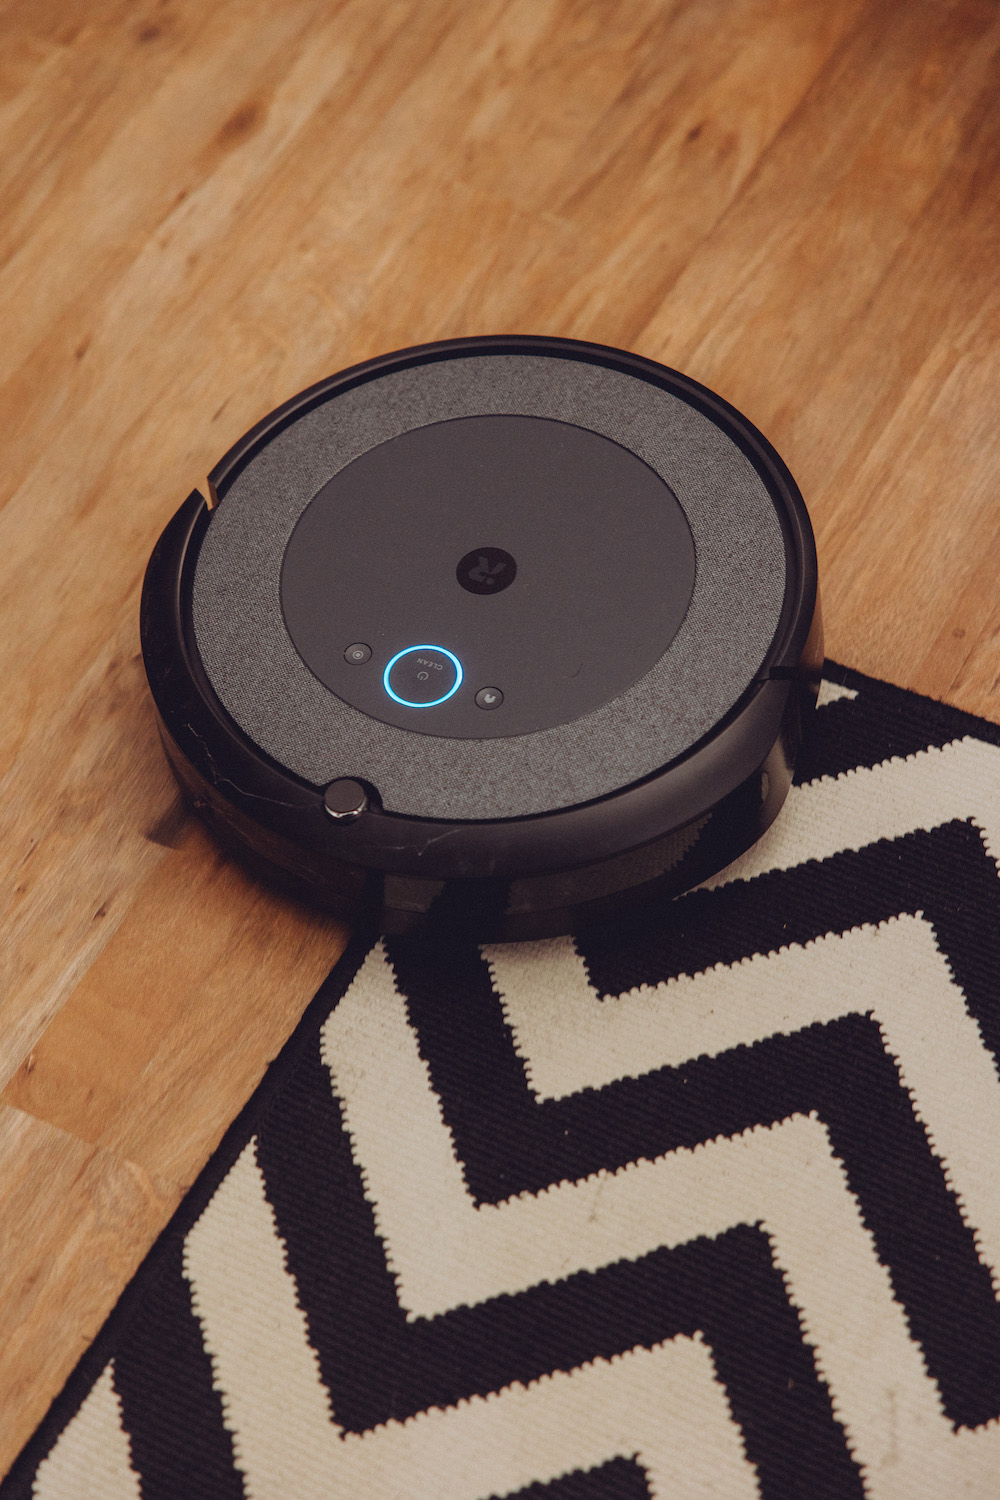 Move over Roomba: There's a new robot in my house